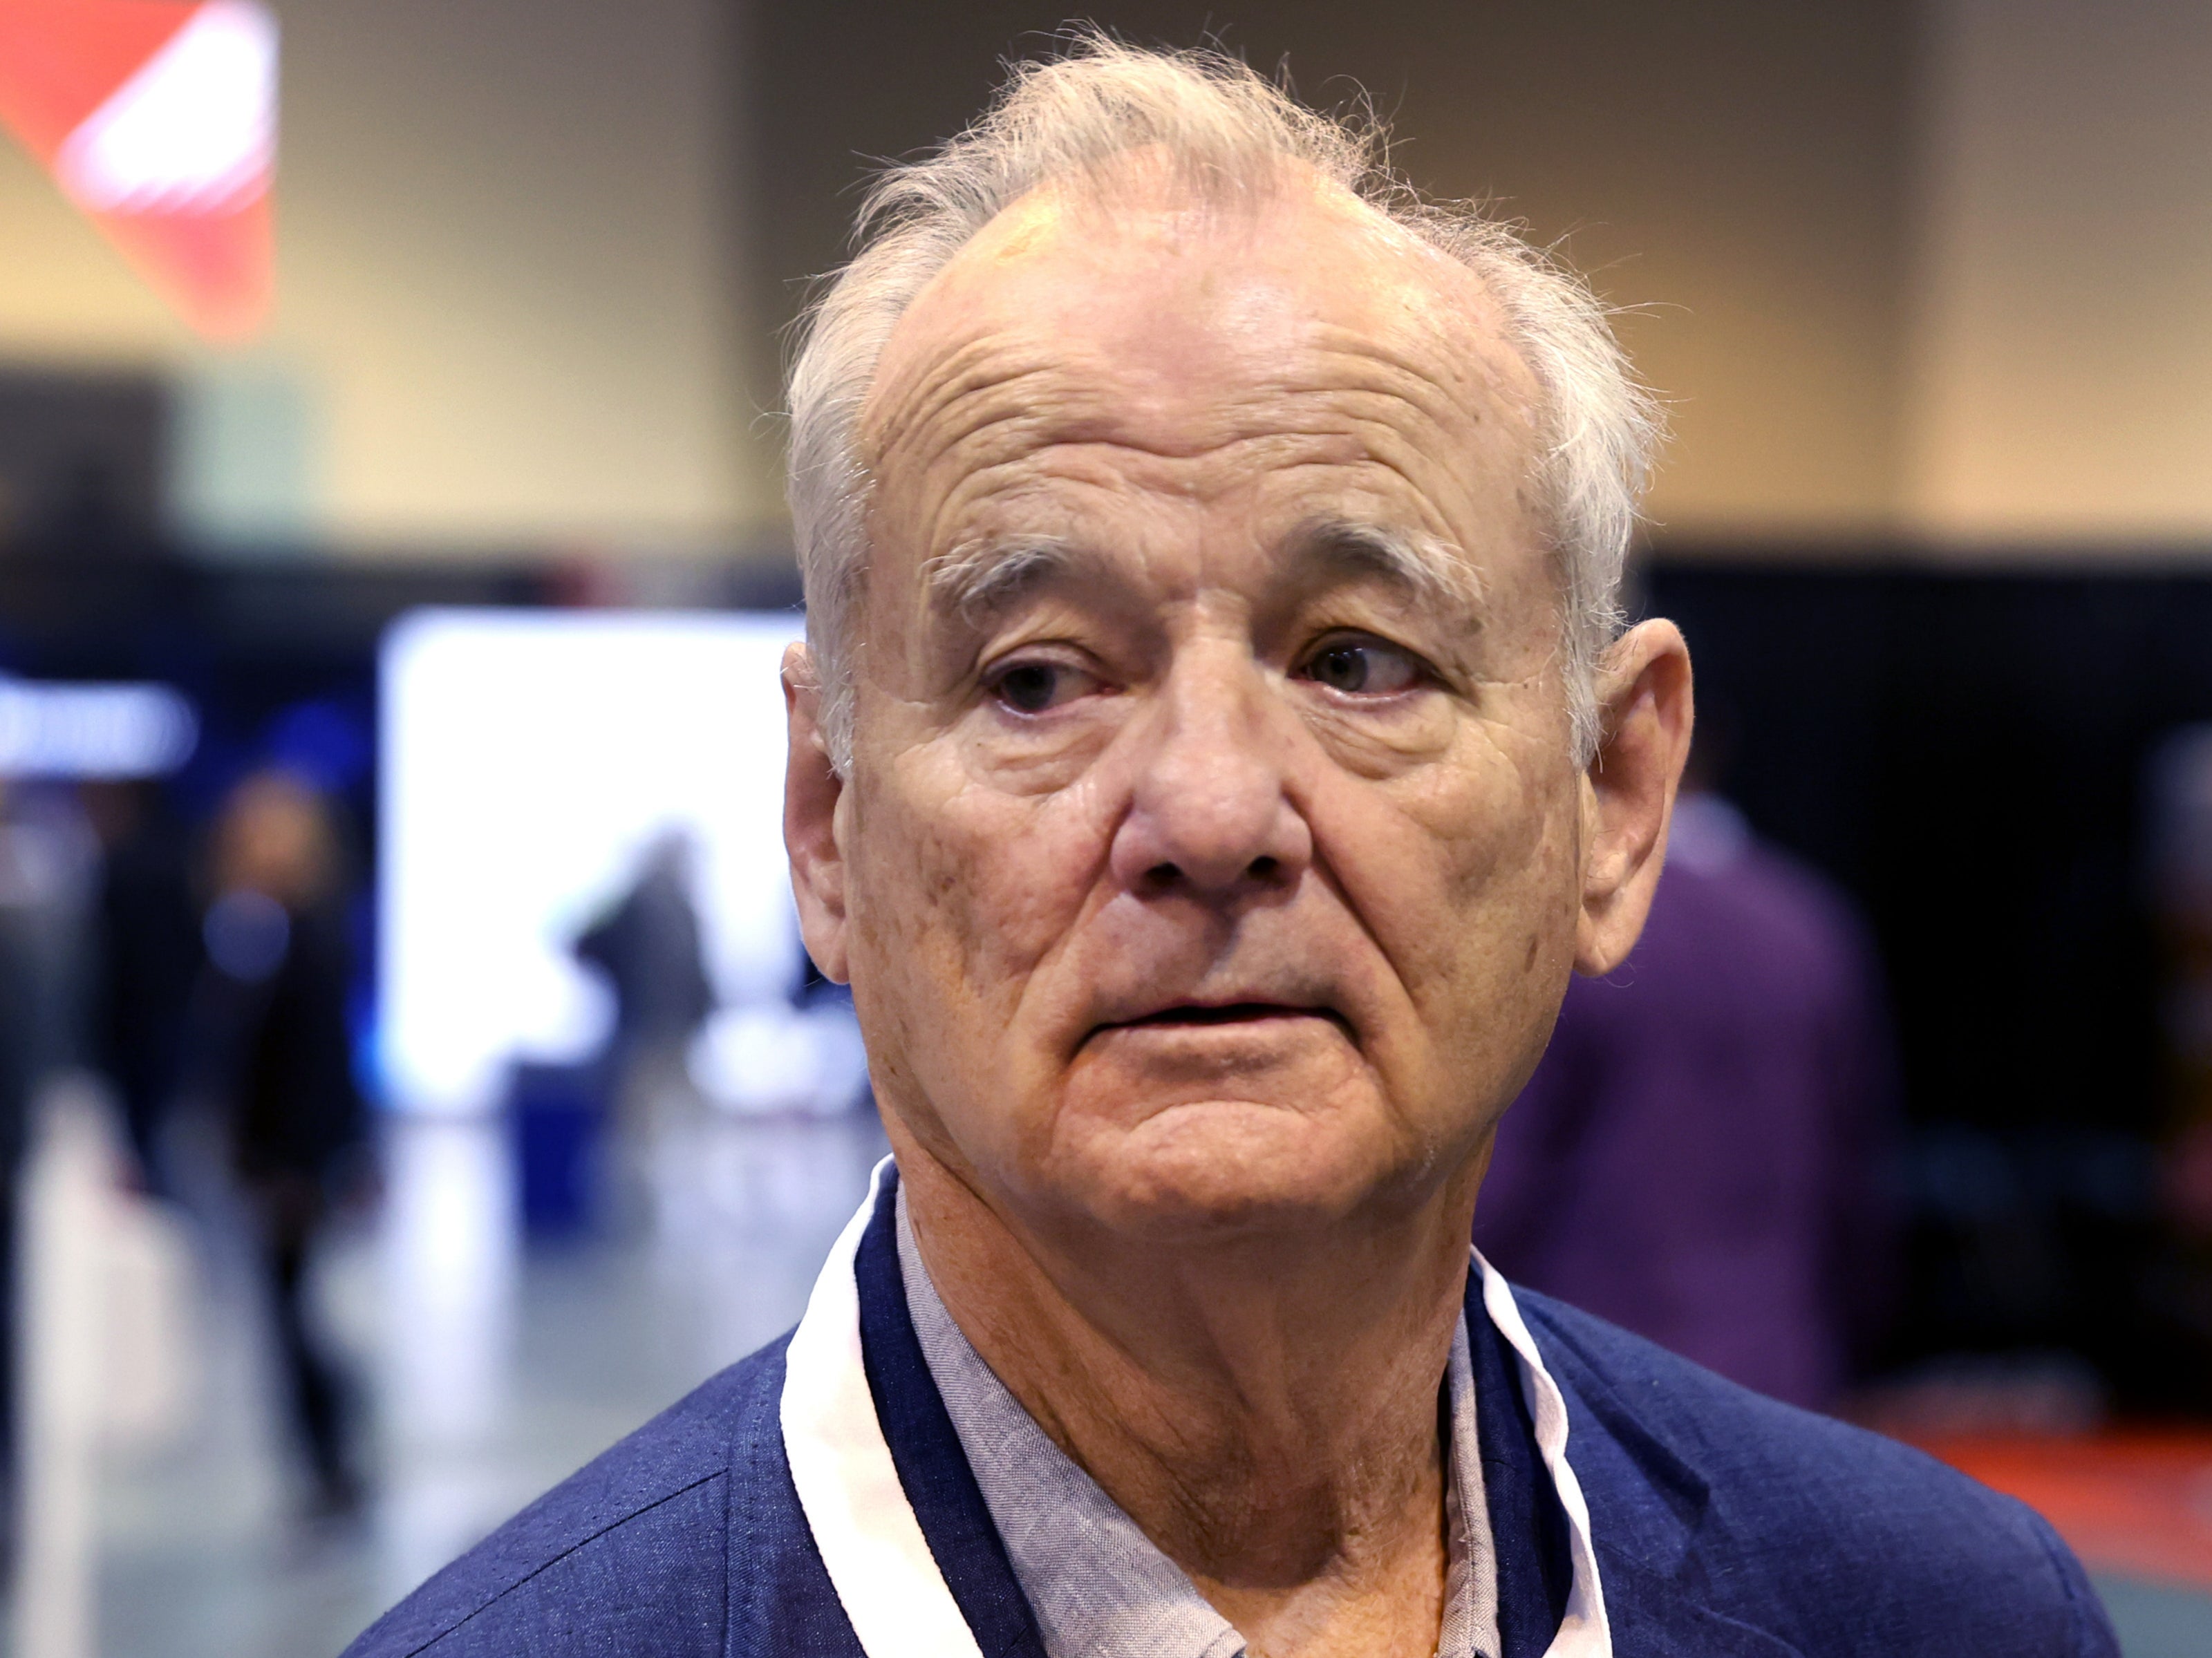 Bill Murray’s involvement was announced back in February